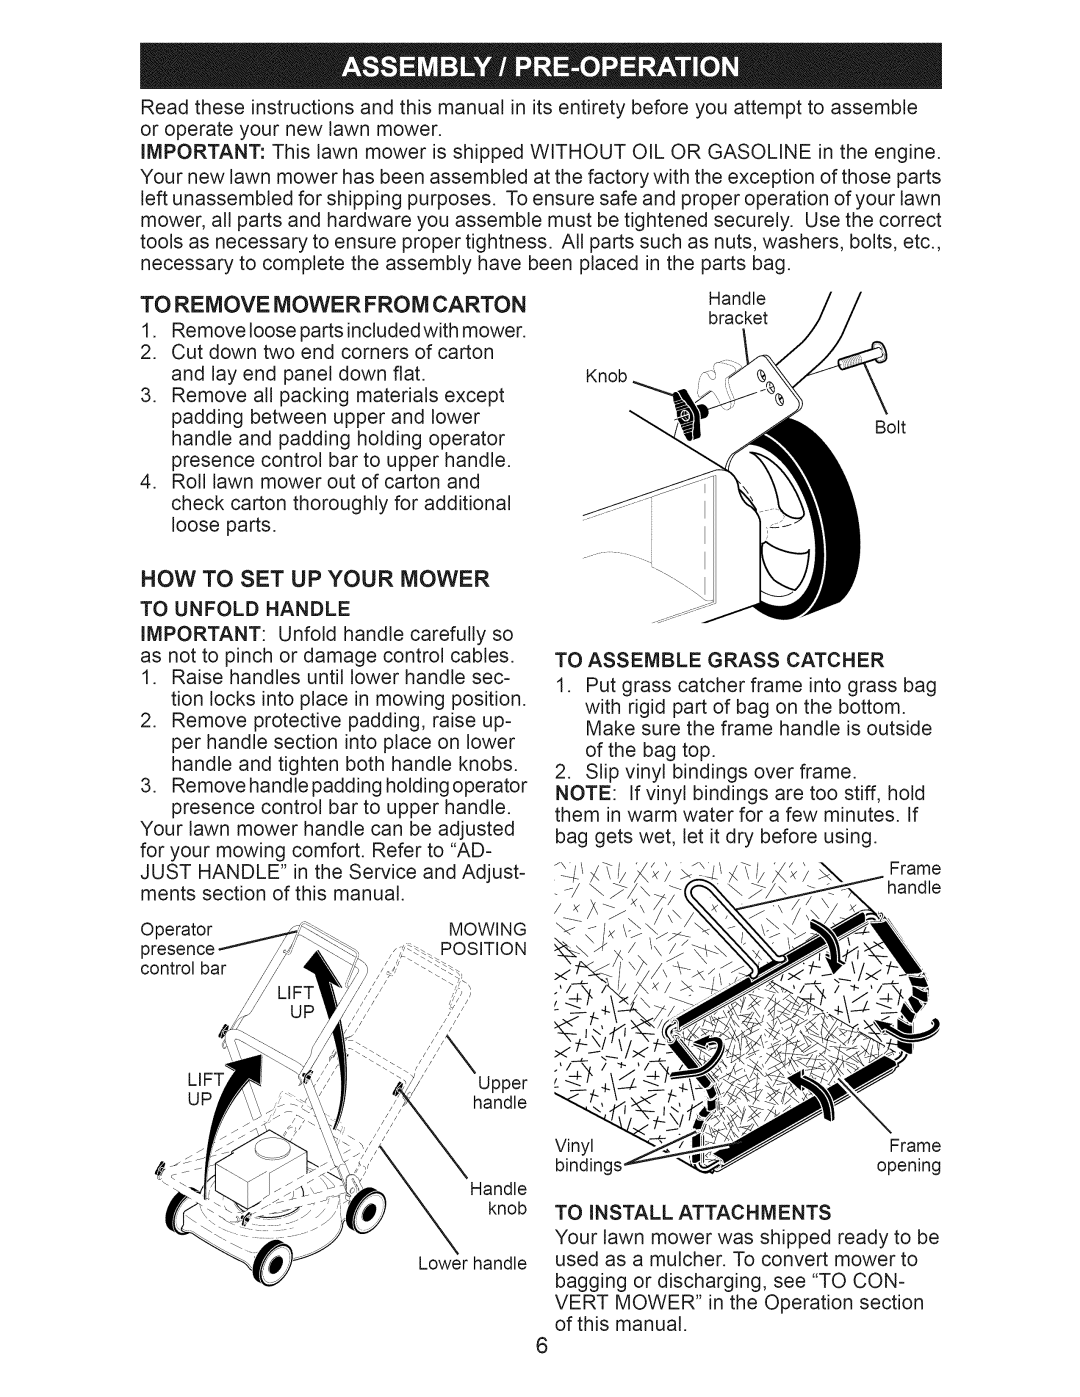 Craftsman 917.376543 manual To Remove Mower From Carton, Now To Set Up Your Mower 